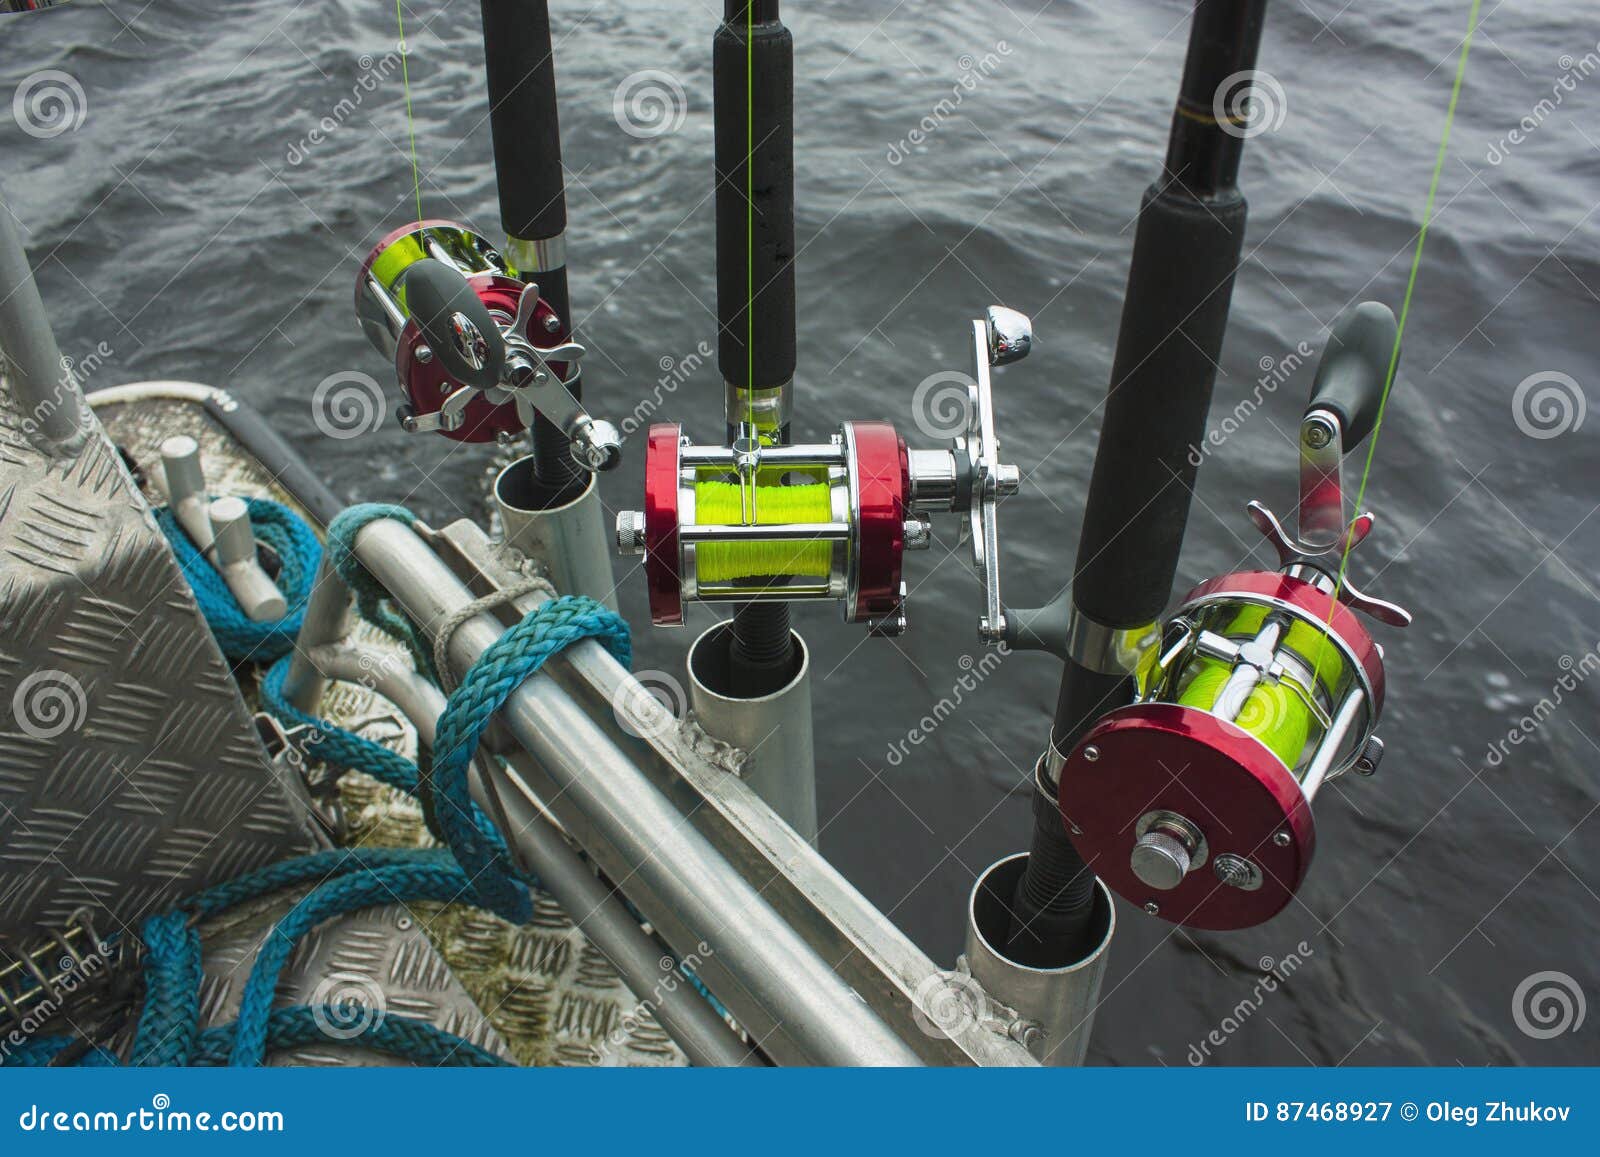 Download Fishing Rods And Reels With Yellow Fishing Line Stock Image Image Of Coast Recreation 87468927 Yellowimages Mockups